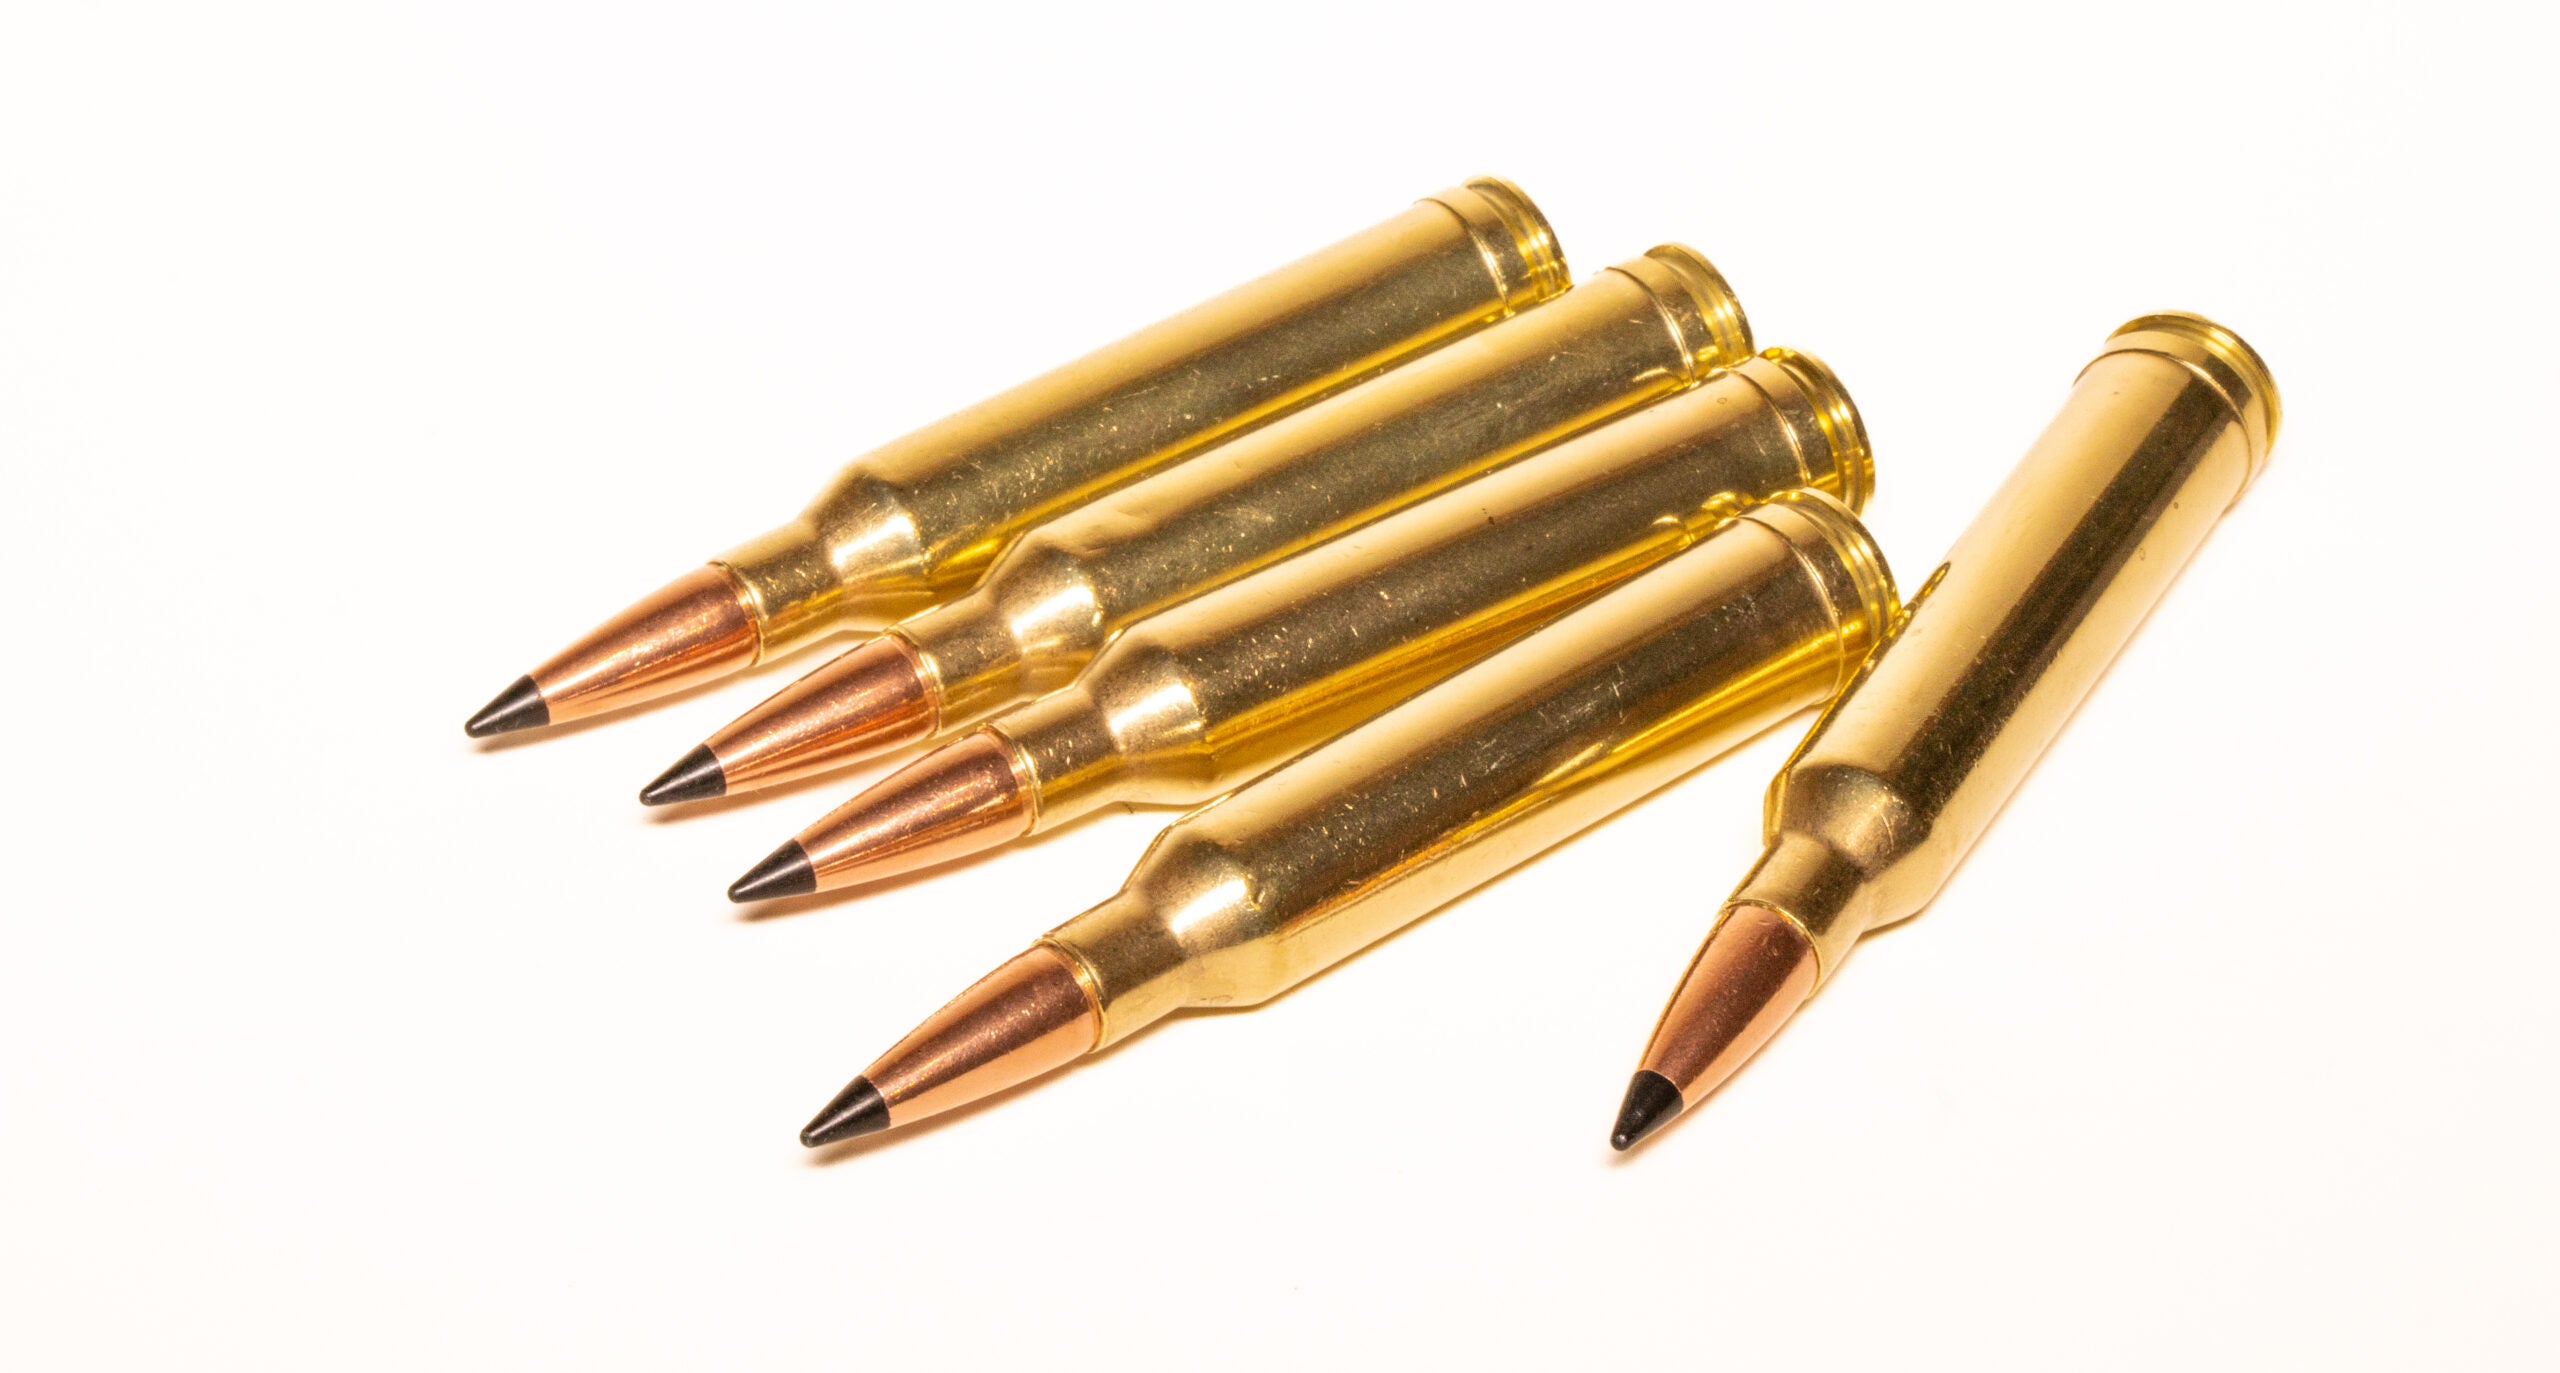 Five 7mm Rem Mag cartridges on a white background.